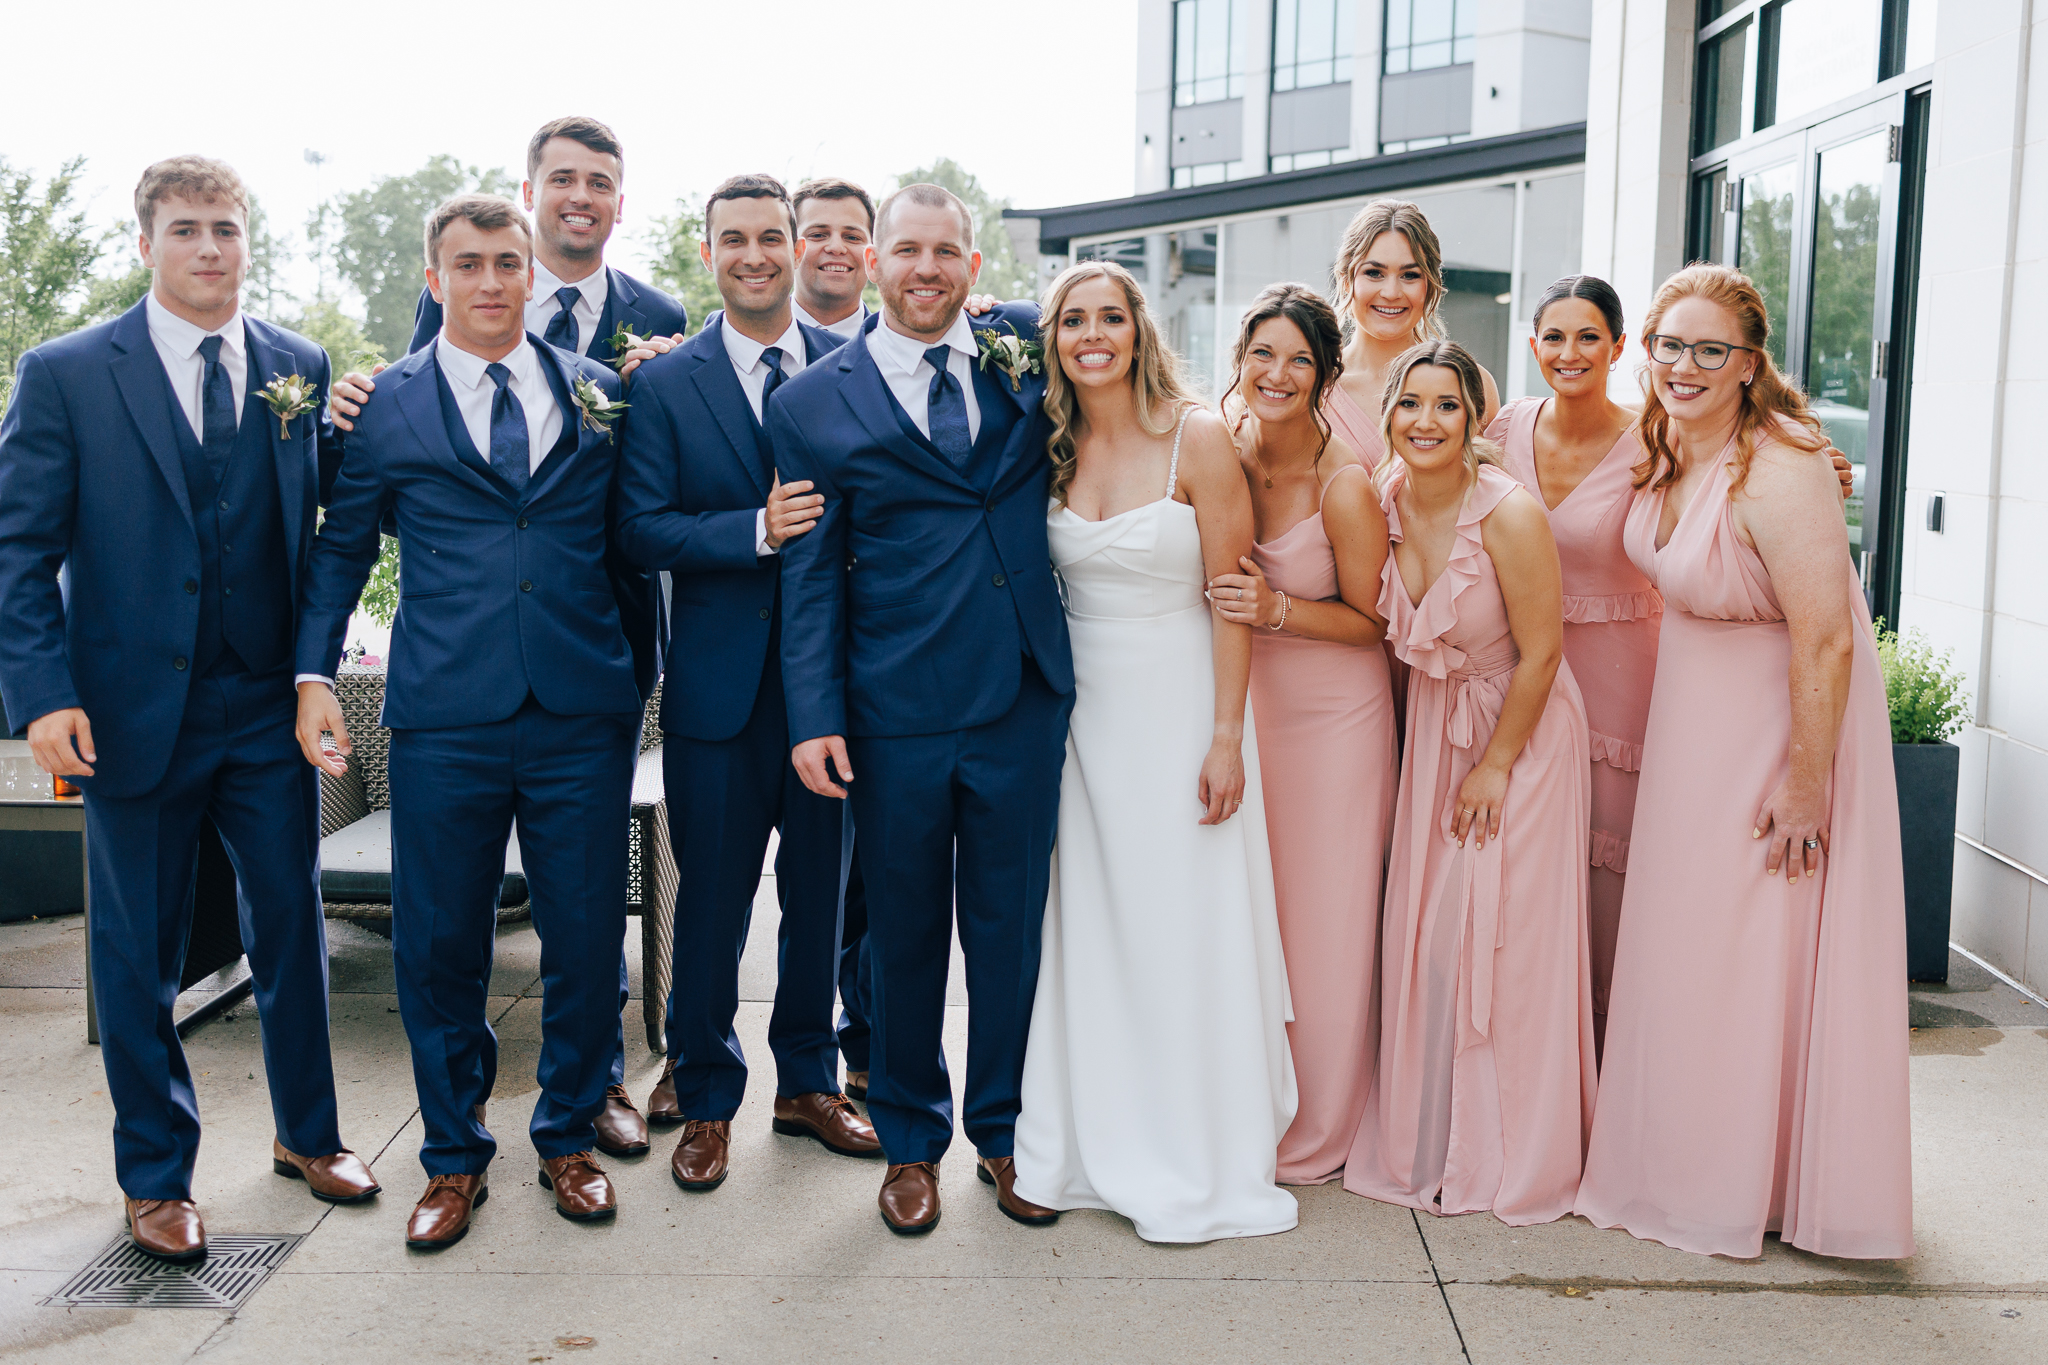 Bridal Party at cocktail hour at The Fives Venue in Columbus Ohio